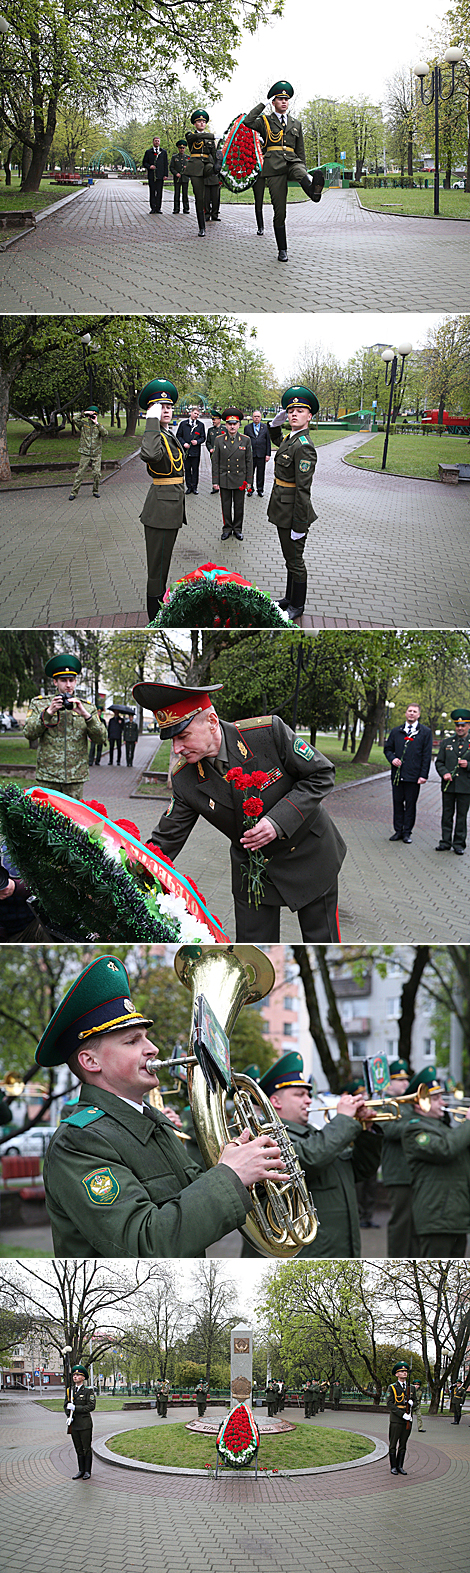 Belarusian border guards lay flowers at a monument near a mass grave in Minsk